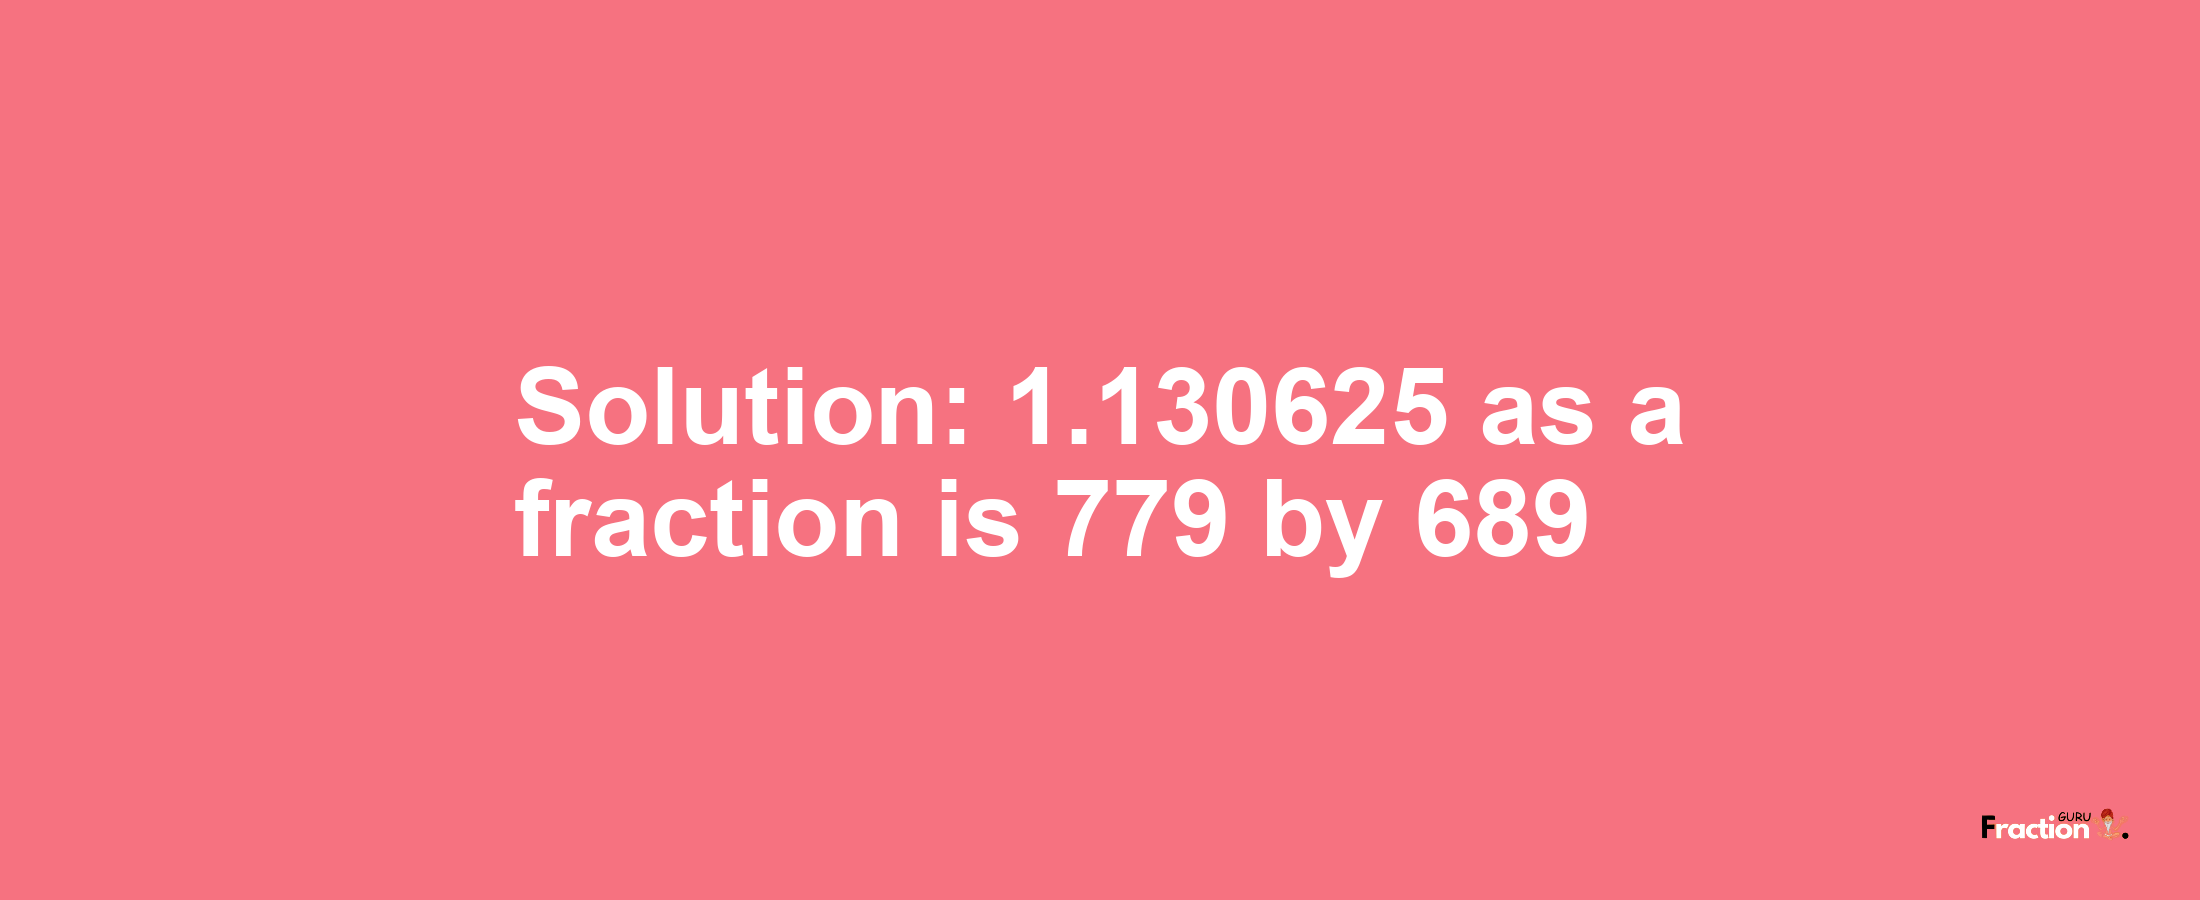 Solution:1.130625 as a fraction is 779/689